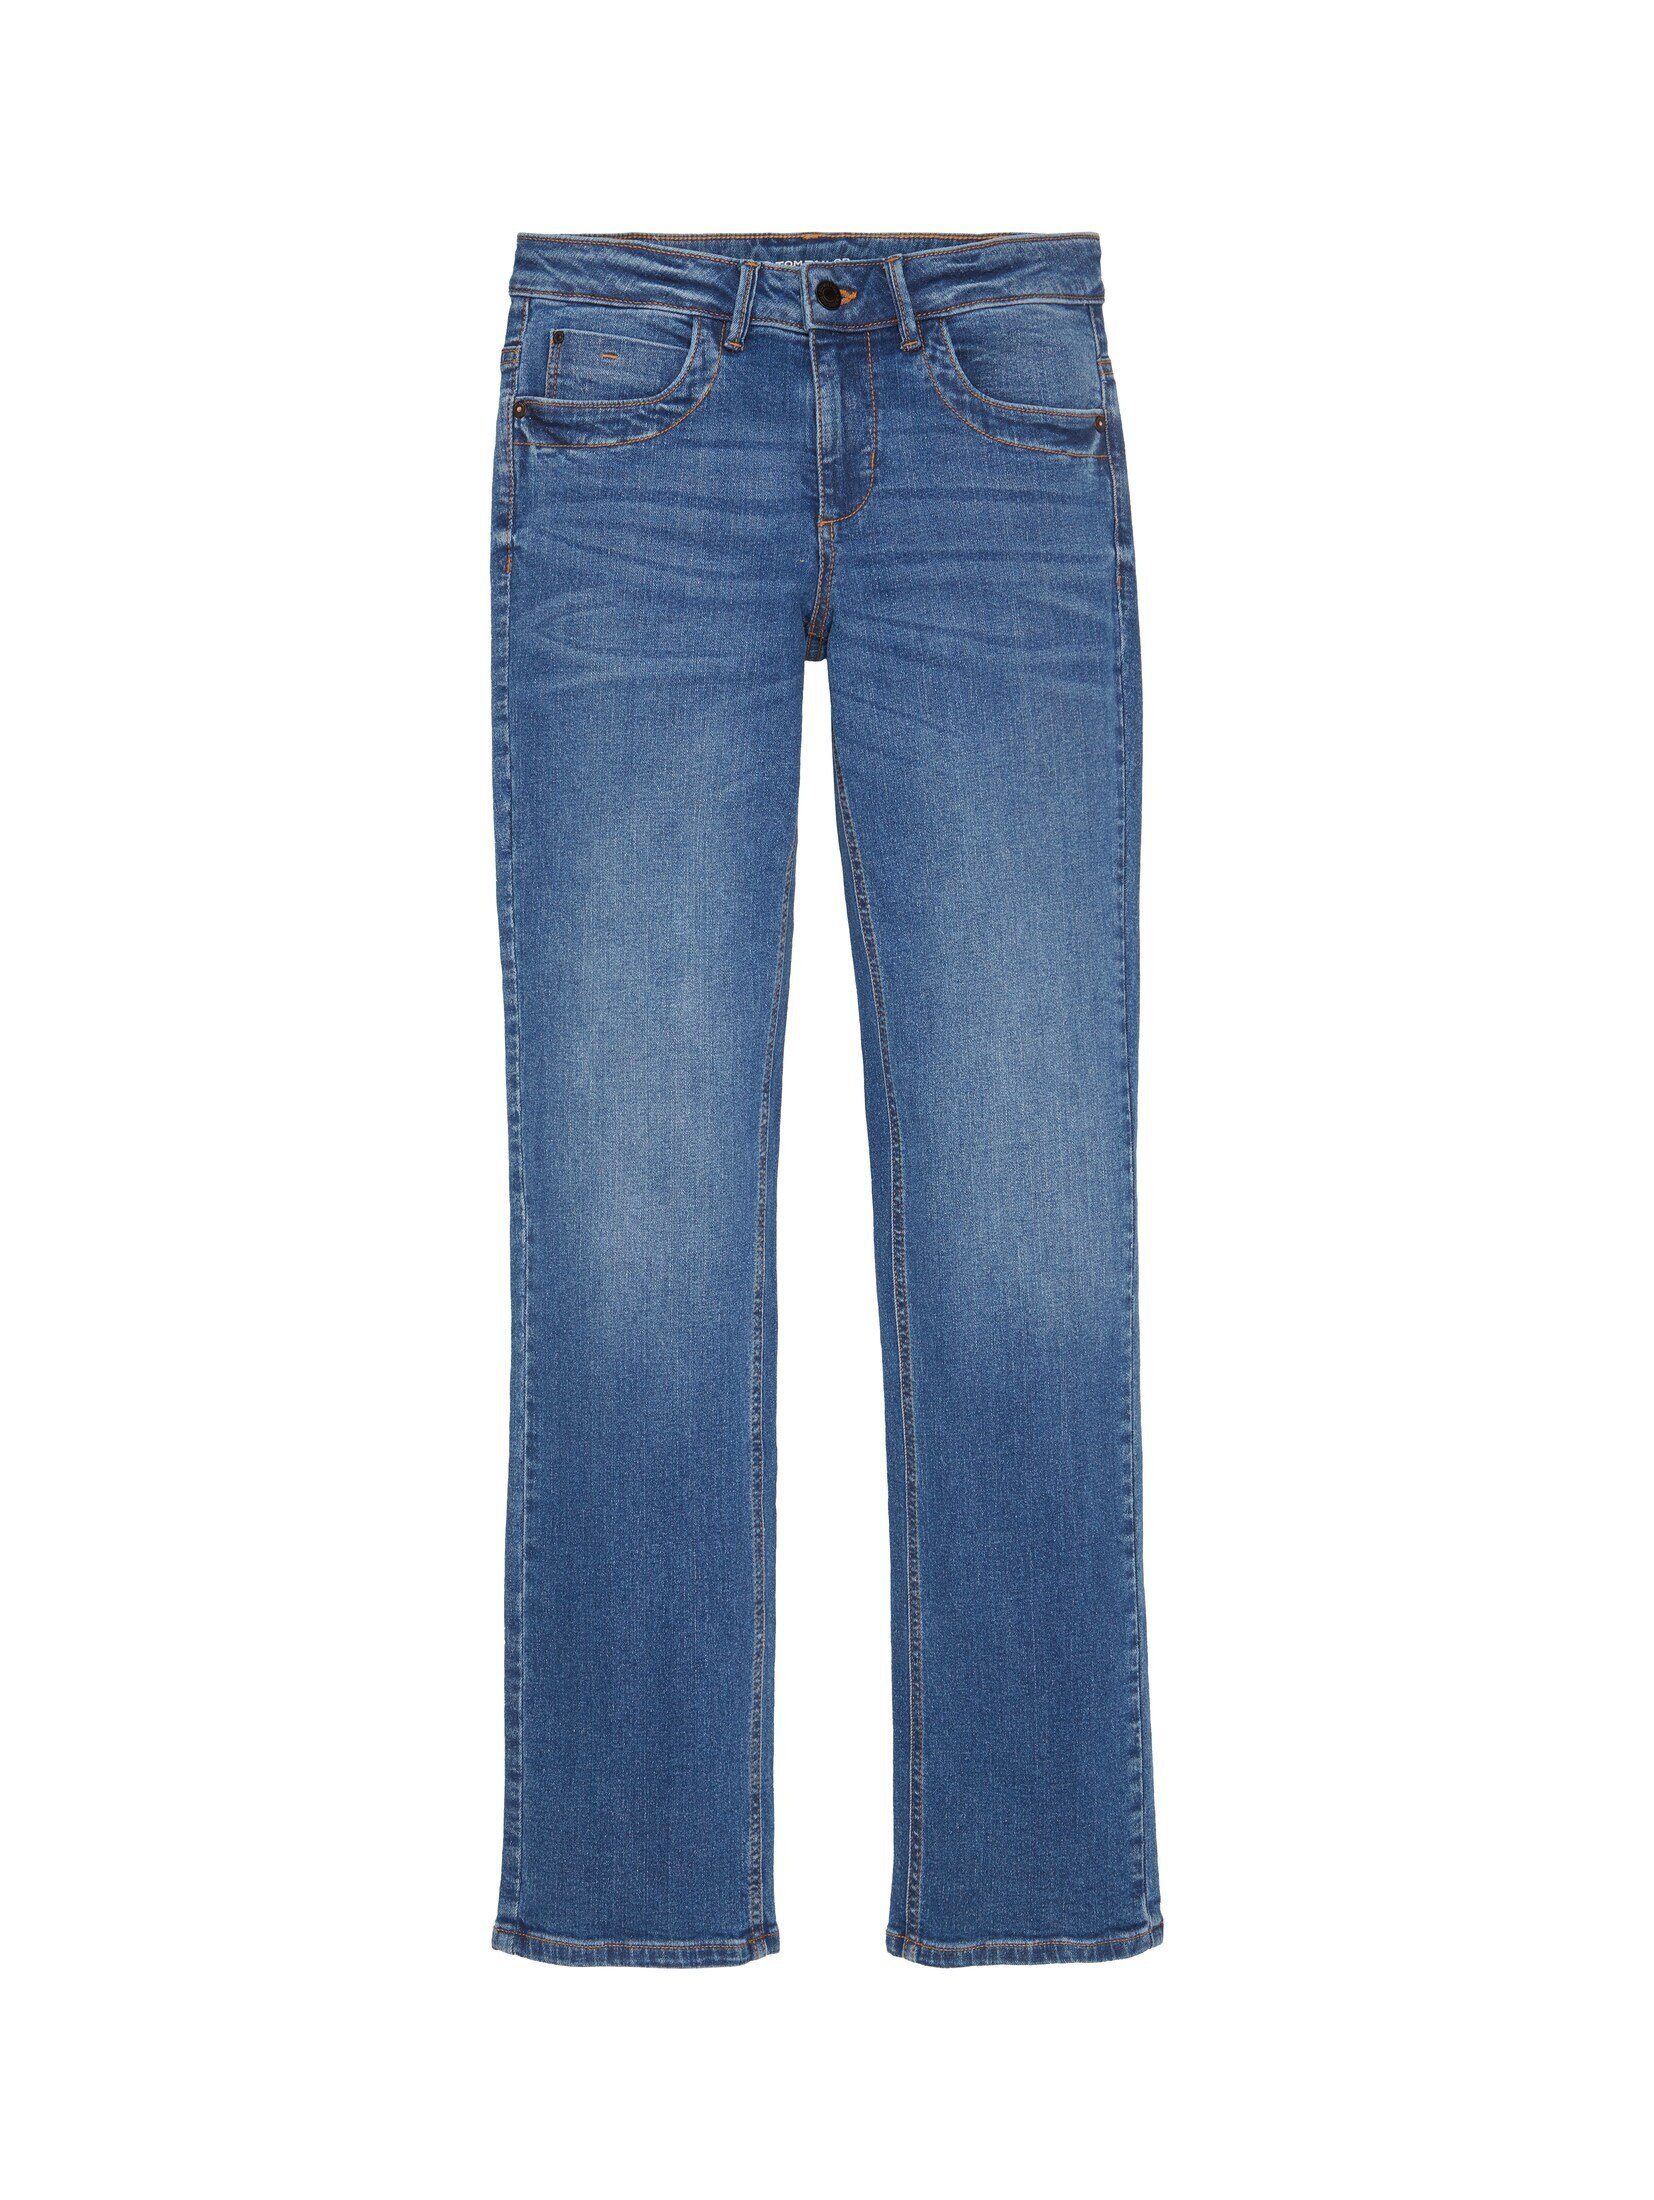 TAILOR TOM Alexa Jeans Skinny-fit-Jeans Straight